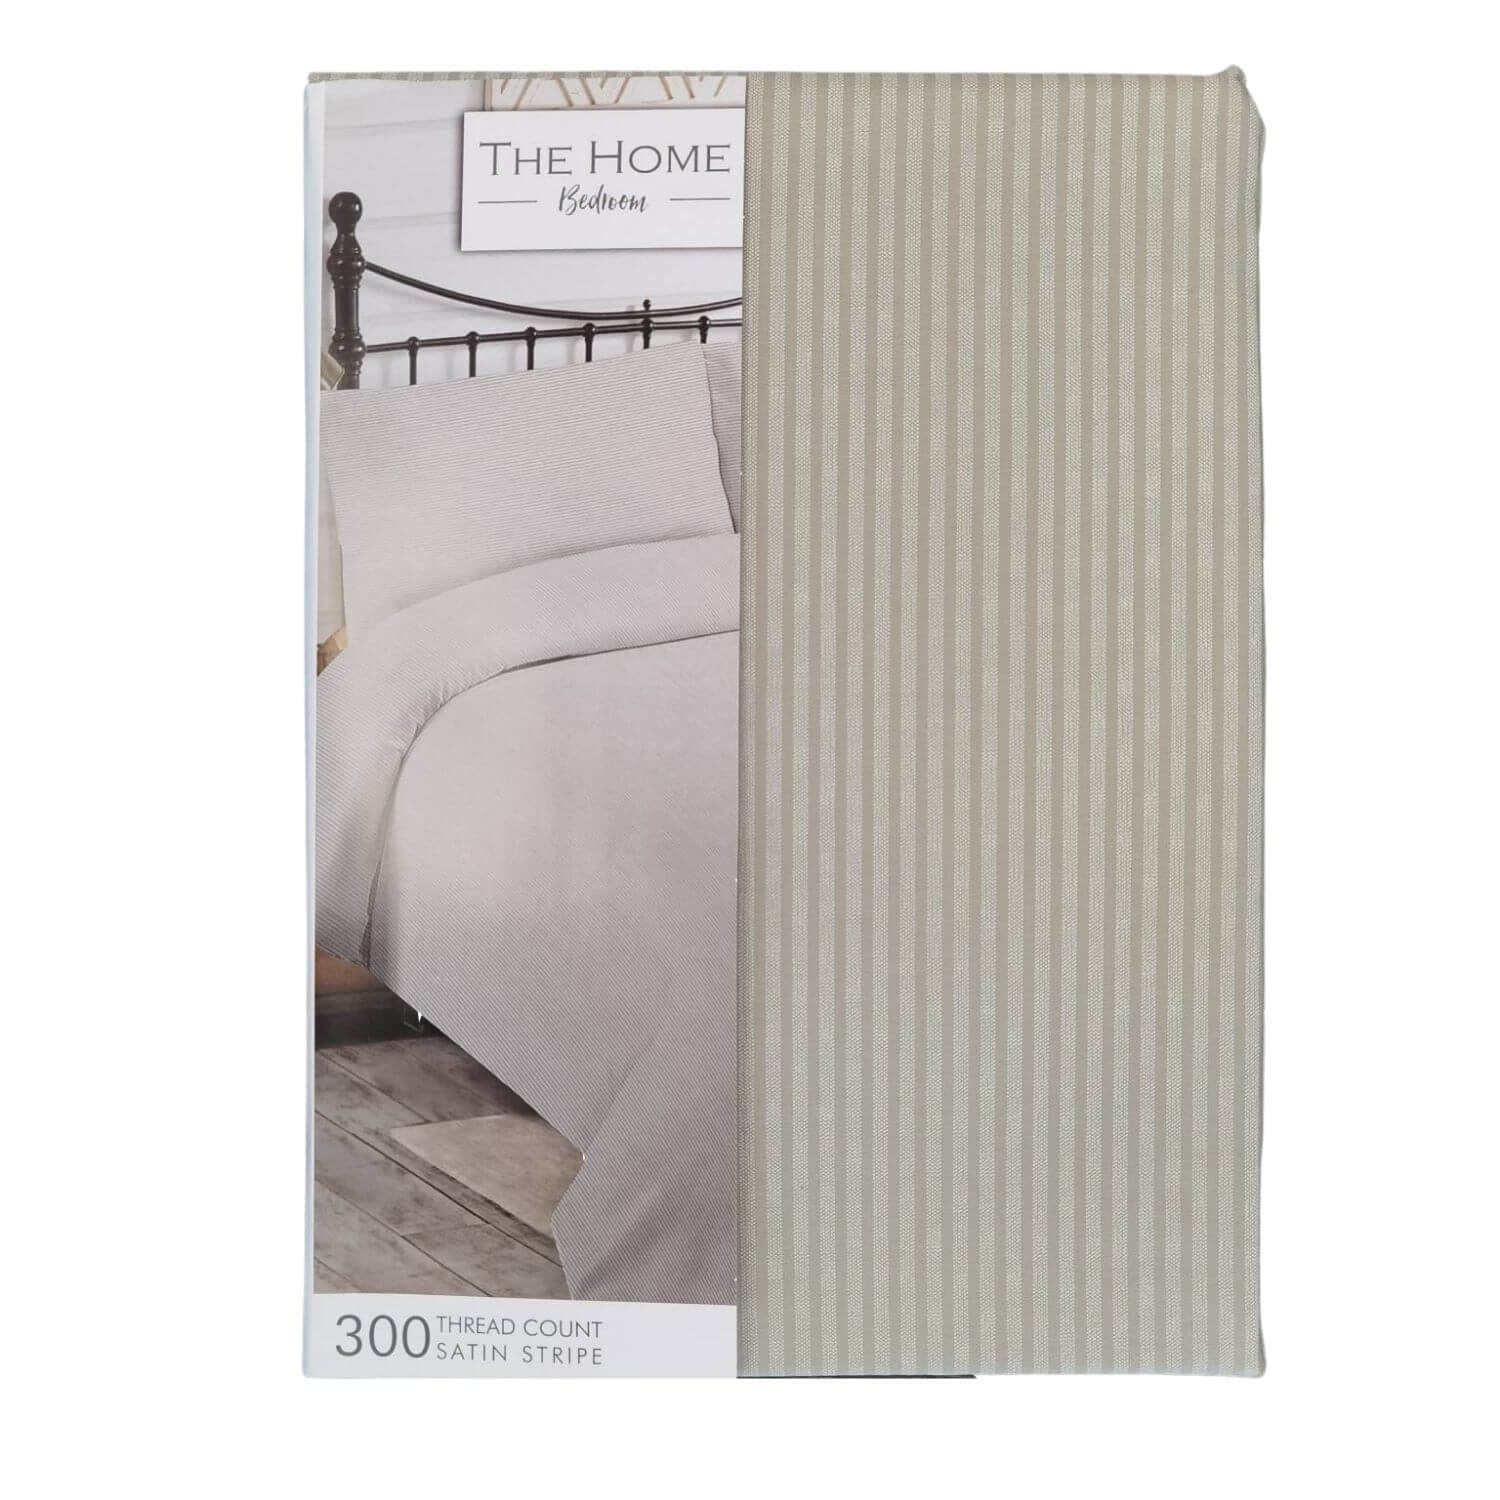  The Home Bedroom 300 Thread Count Satin Stripe Duvet Set - Grey 1 Shaws Department Stores